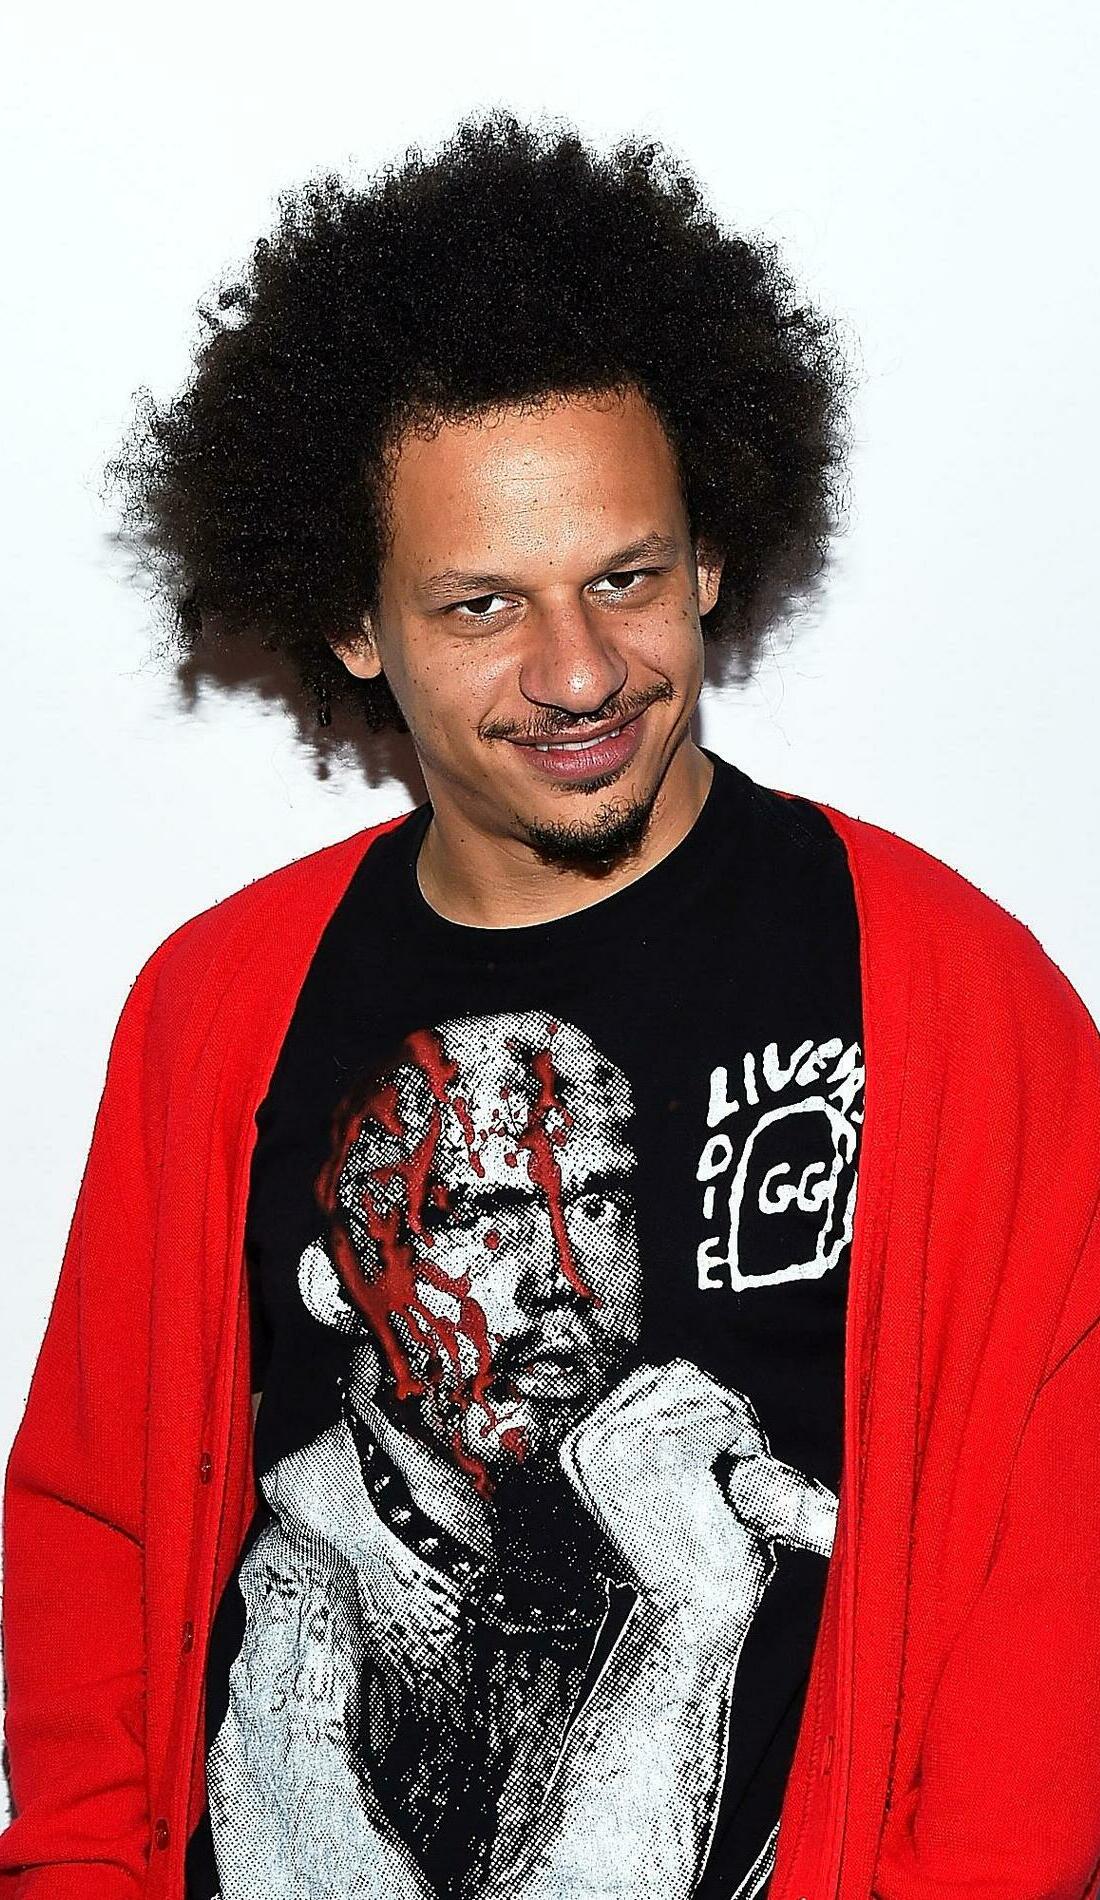 A Eric Andre live event